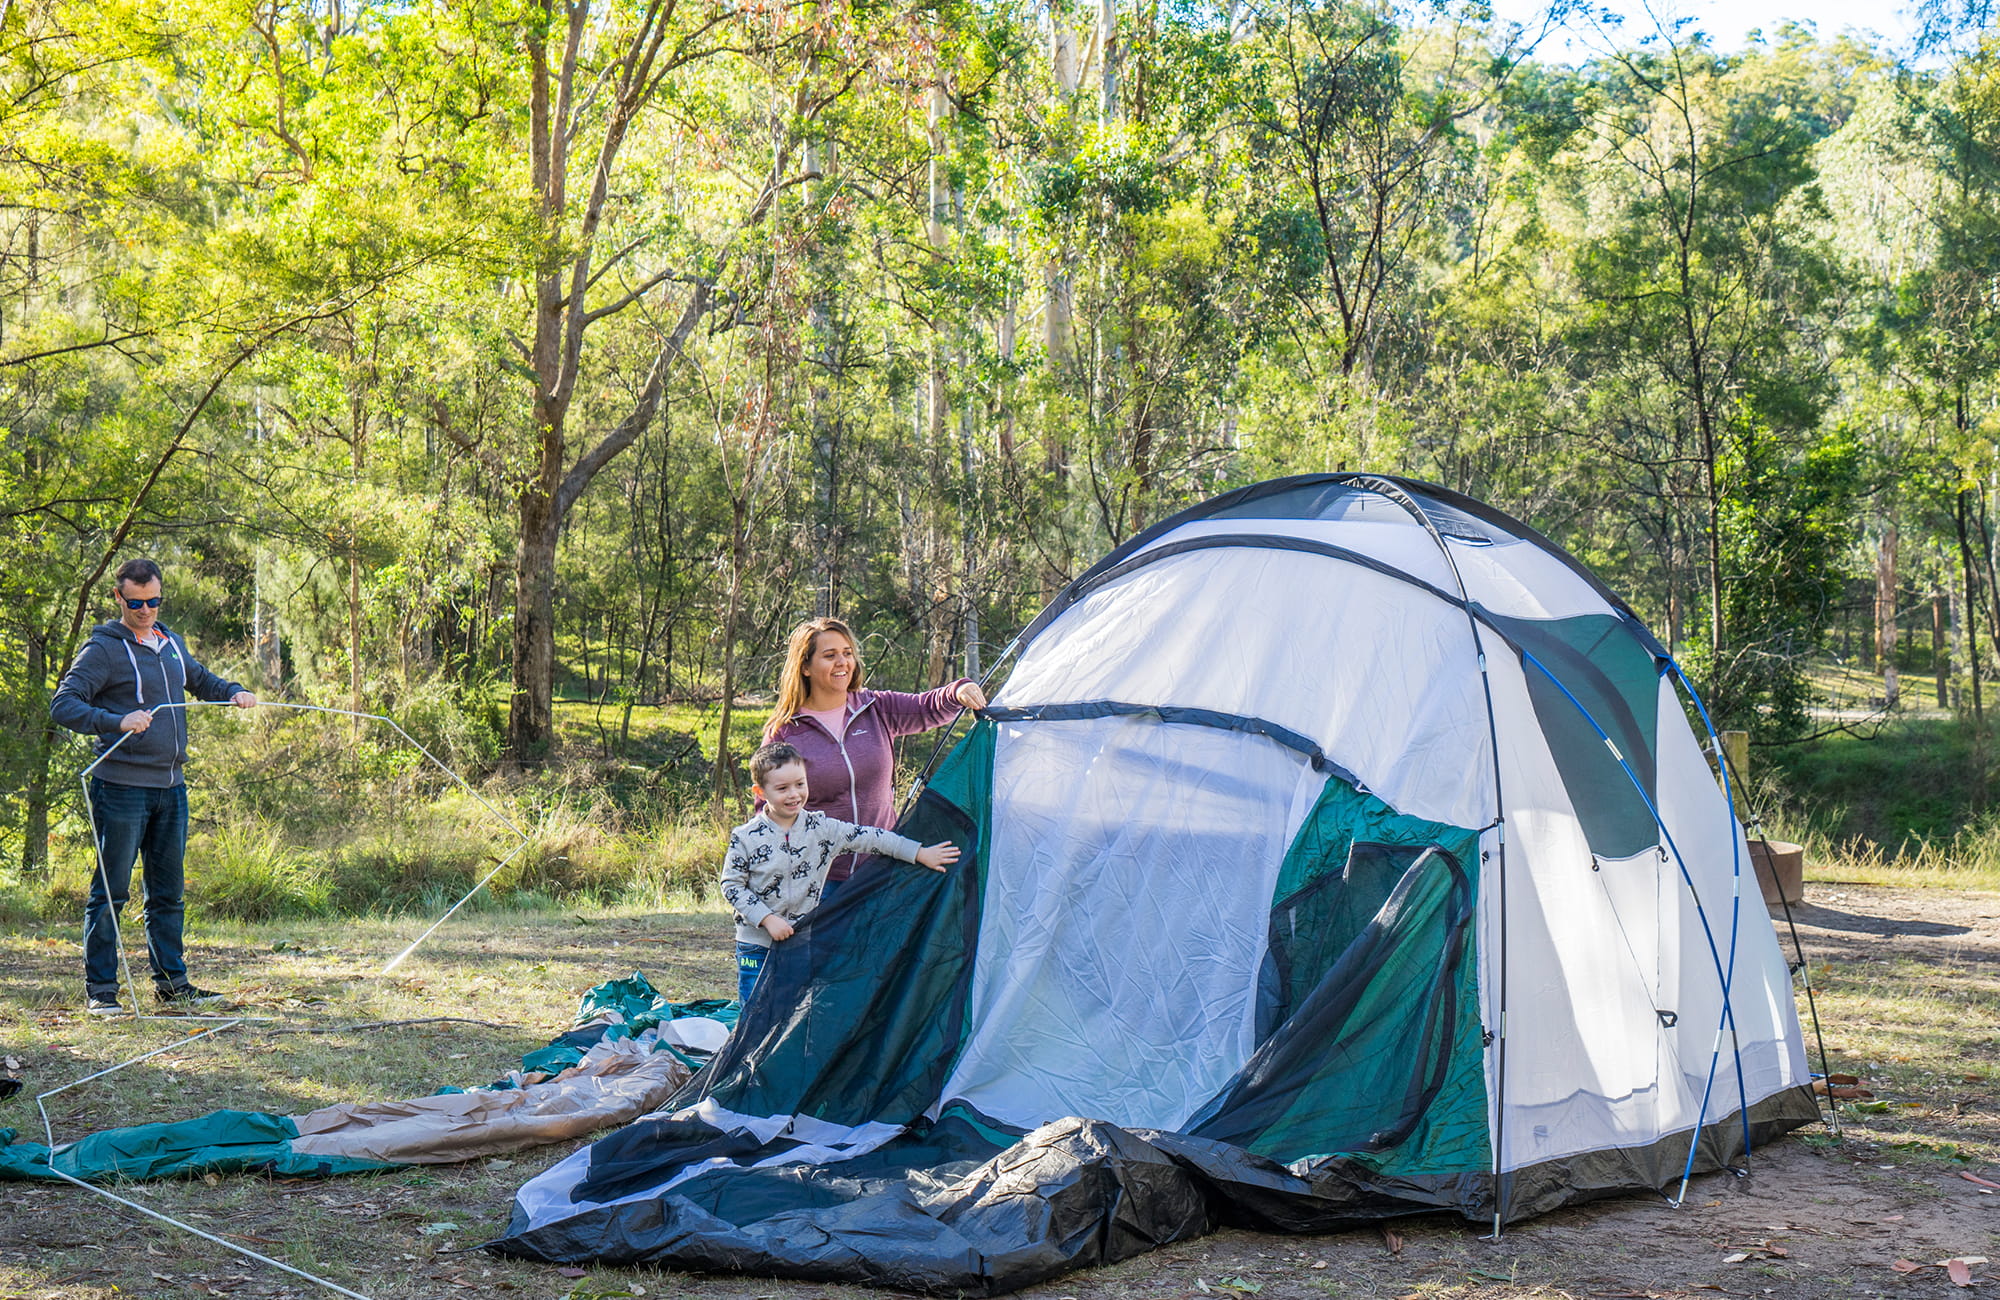 Man pitching a tent at Euroka campground near Glenbook in the lower Blue Mountains. Photo: OEH/Simone Cottrell